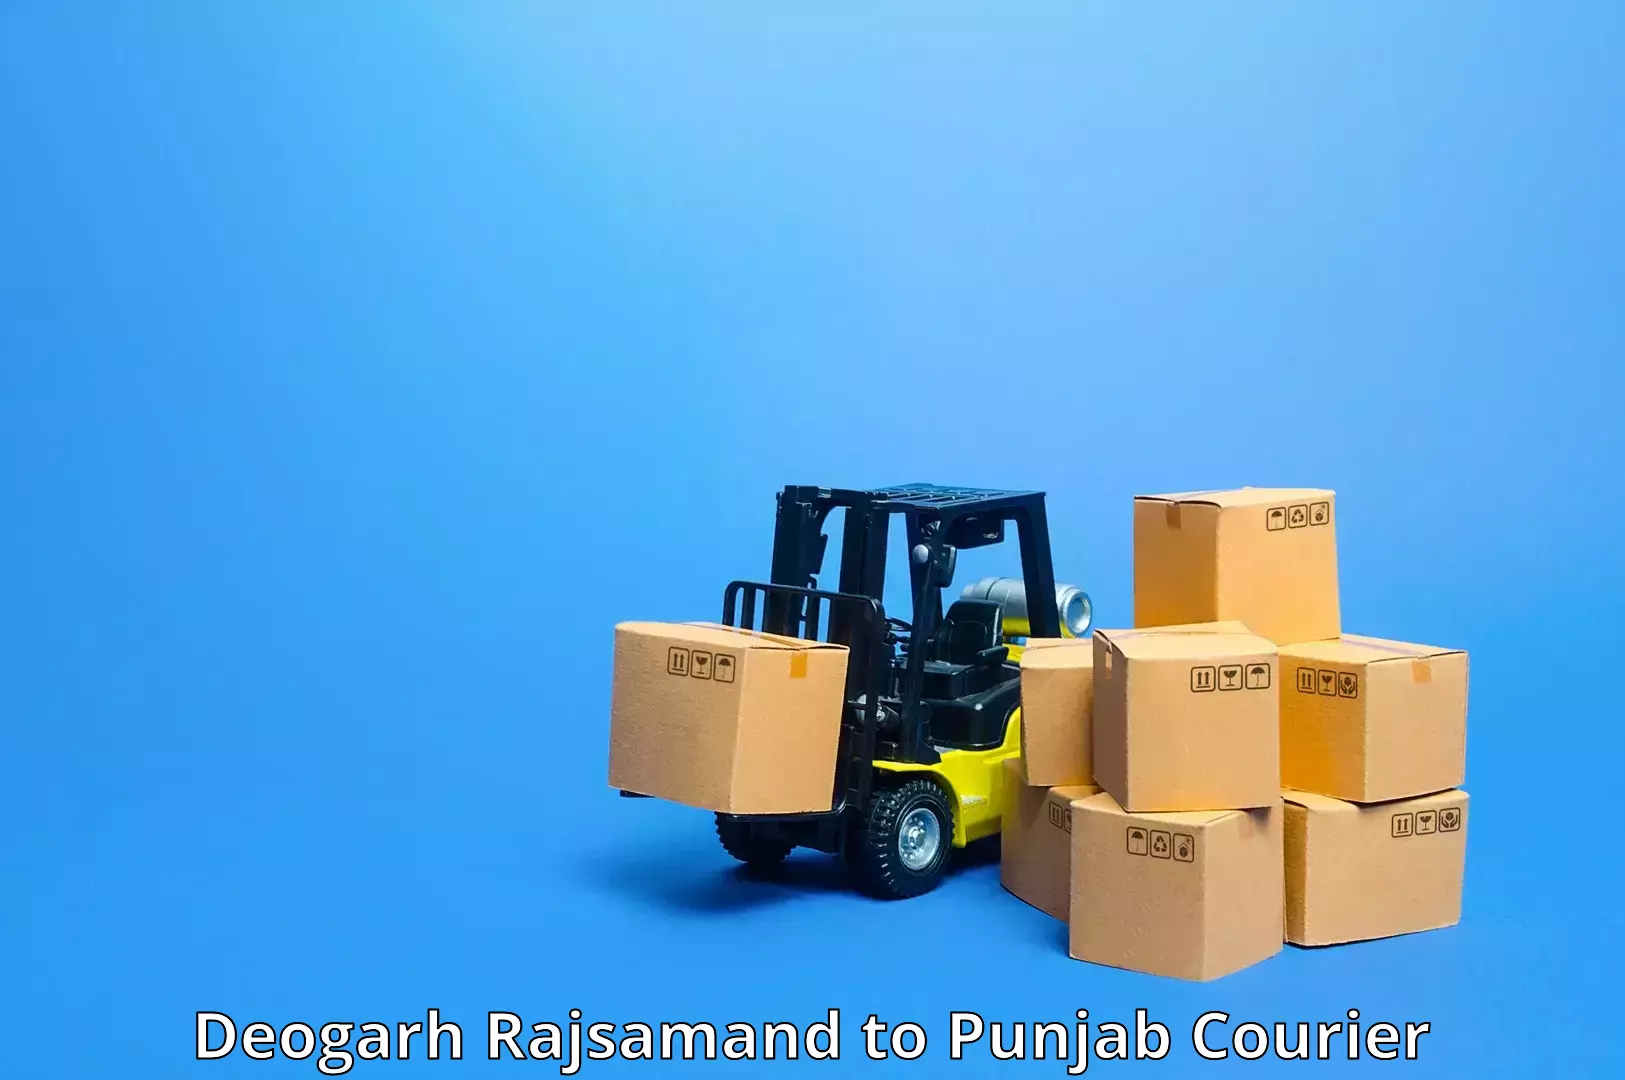 Fast delivery service Deogarh Rajsamand to Batala